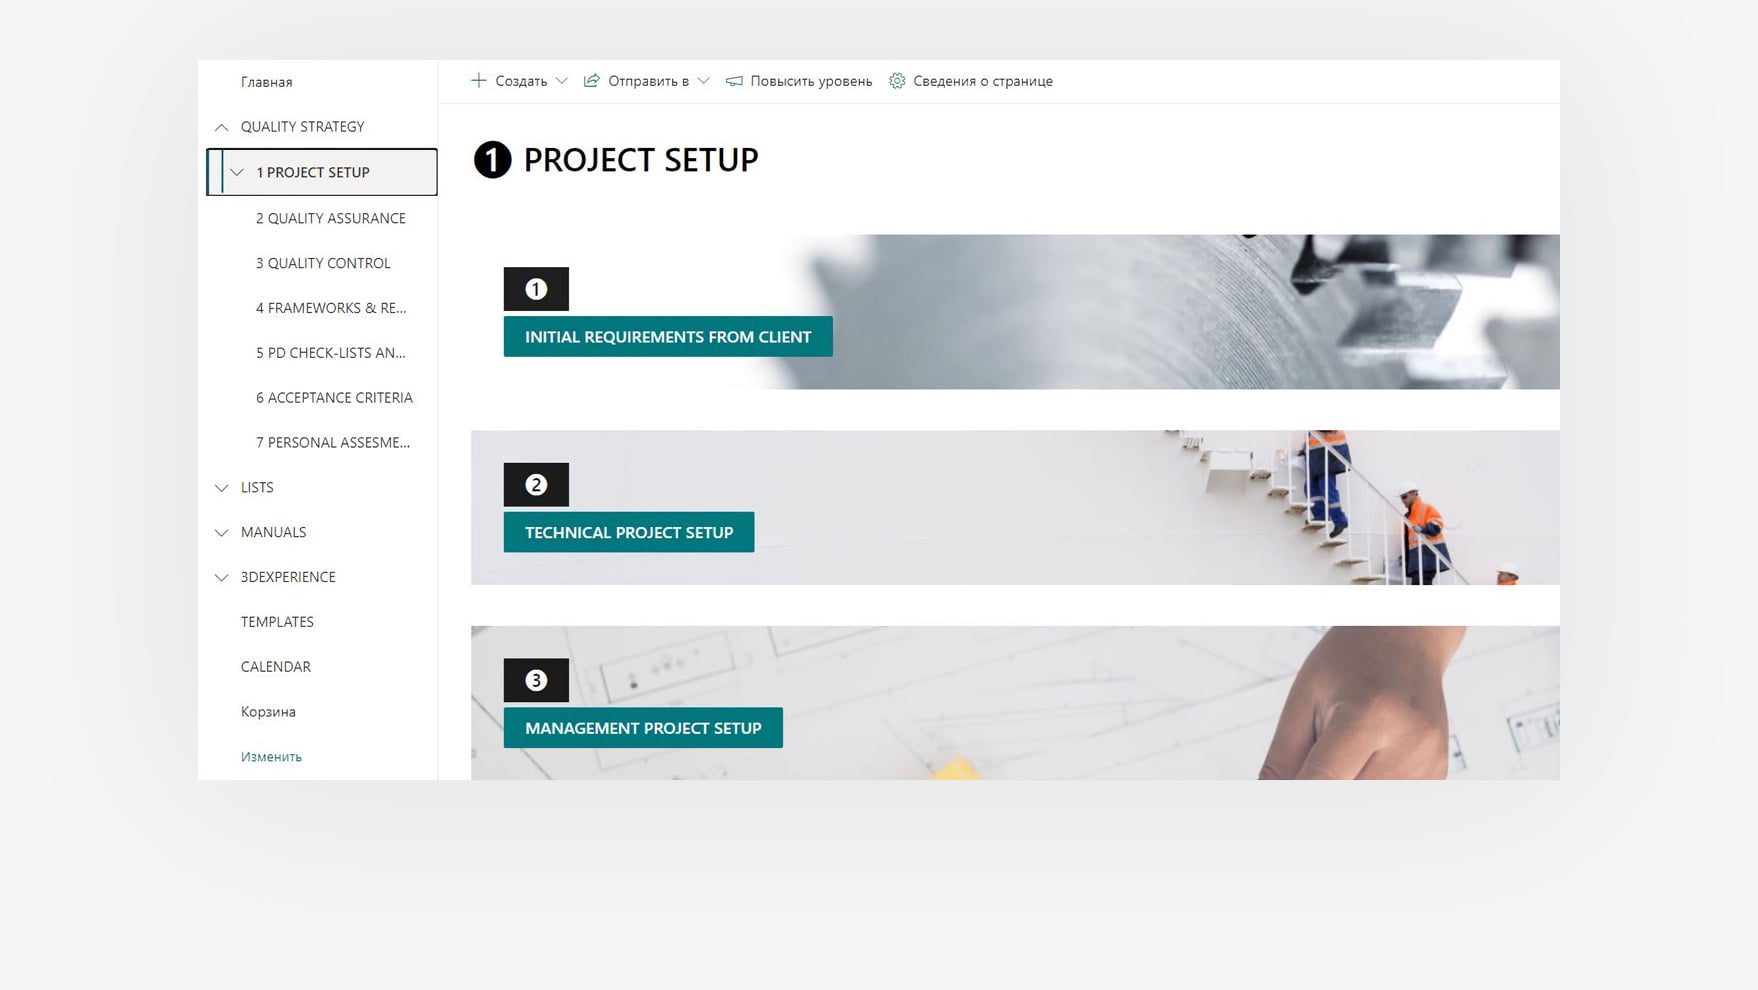 Project stages contain descriptions of their goals, receive points, workflow & procedure to enchance business process management